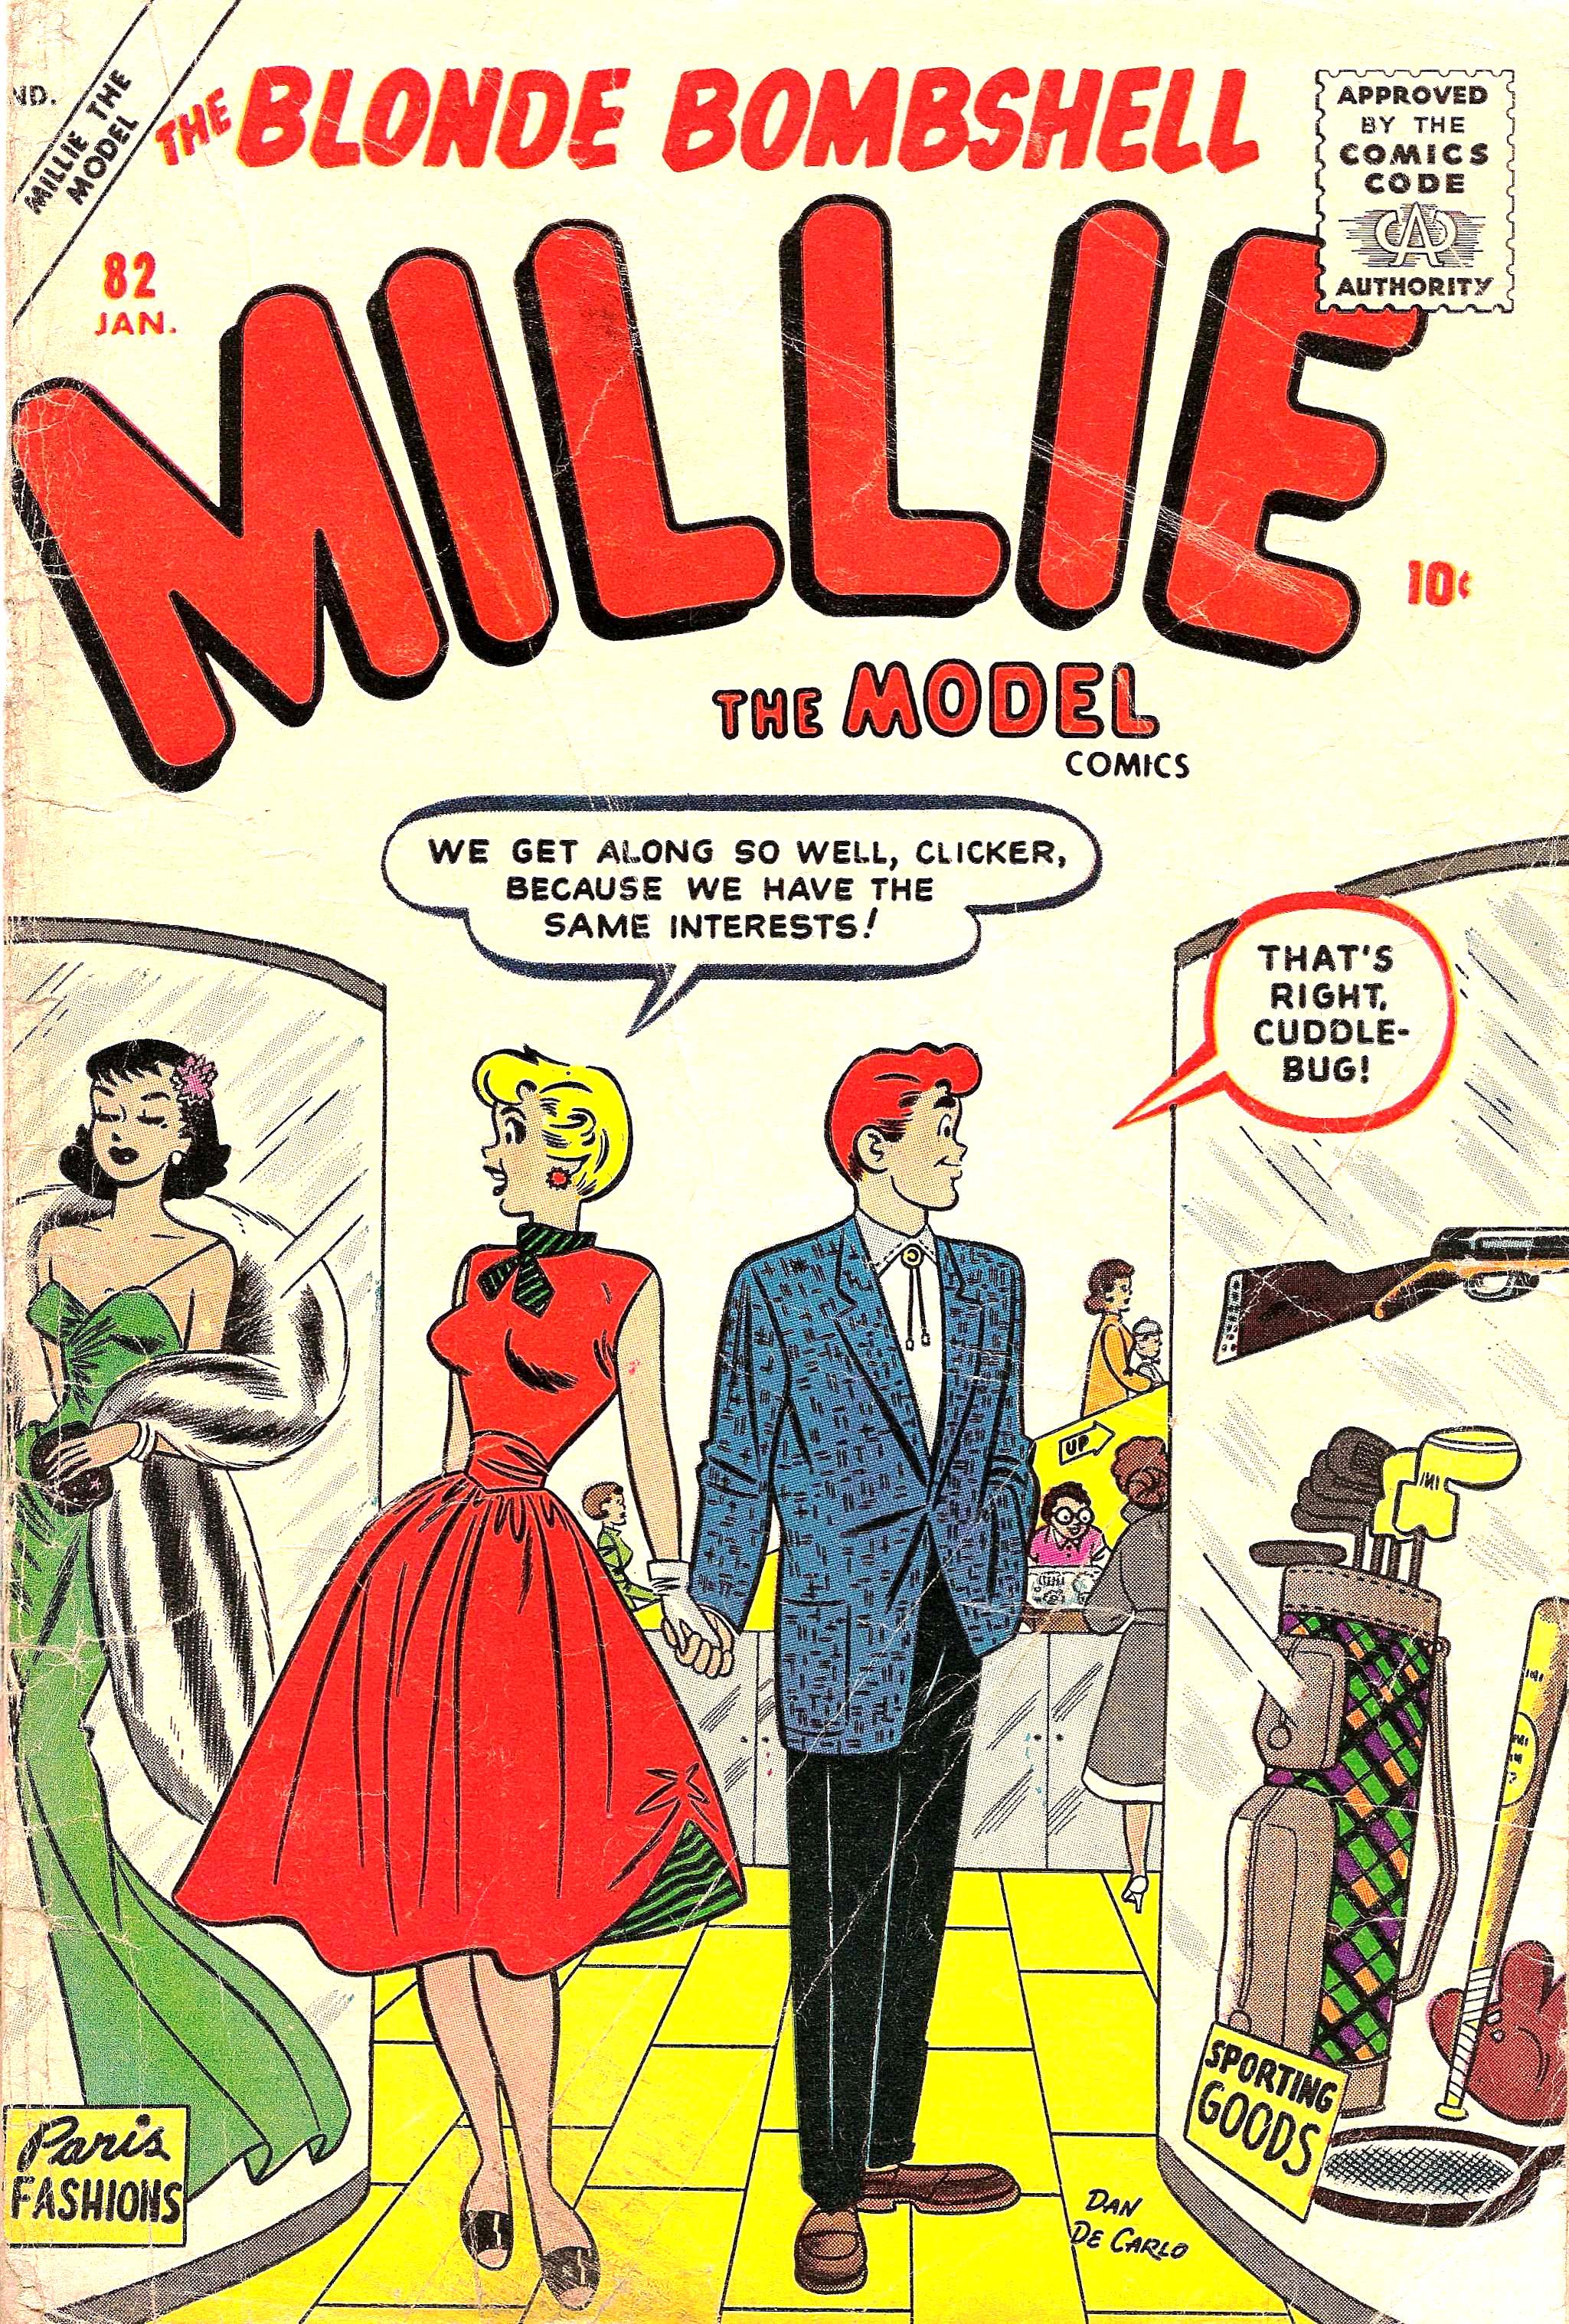 Read online Millie the Model comic -  Issue #82 - 1